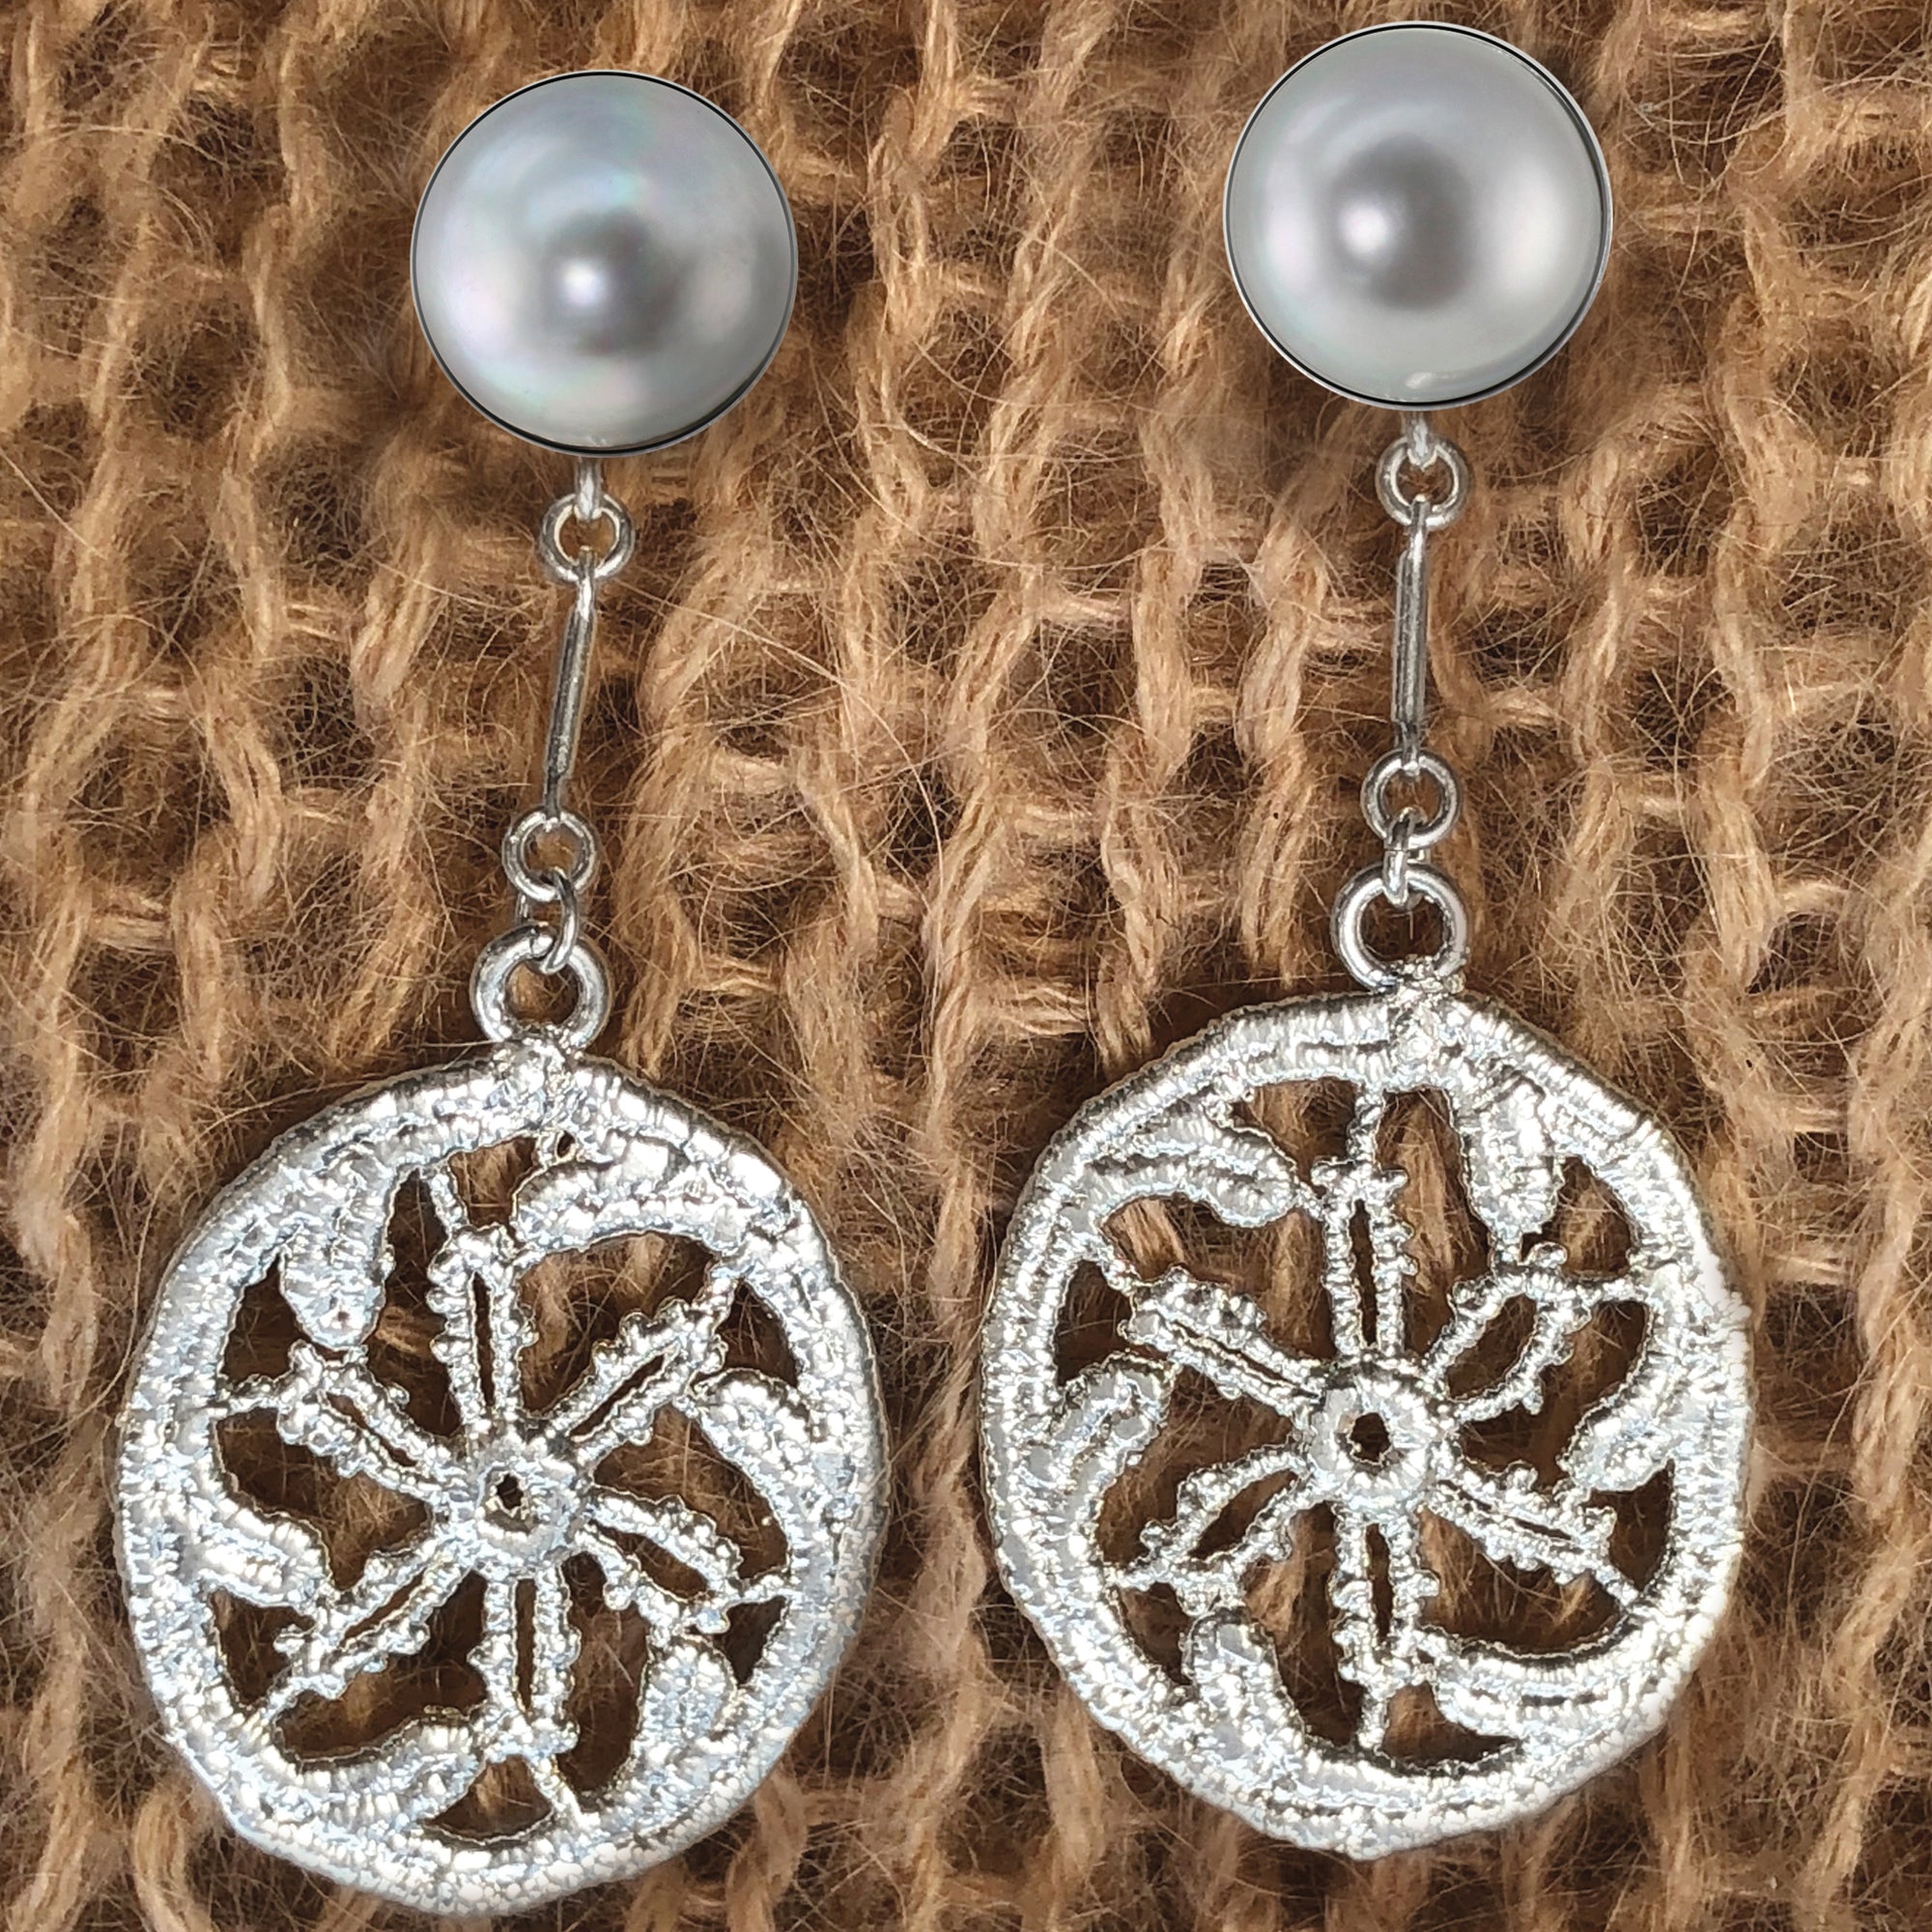 Silver grey 10mm pearl earrings with round lace pendants in sterling silver.